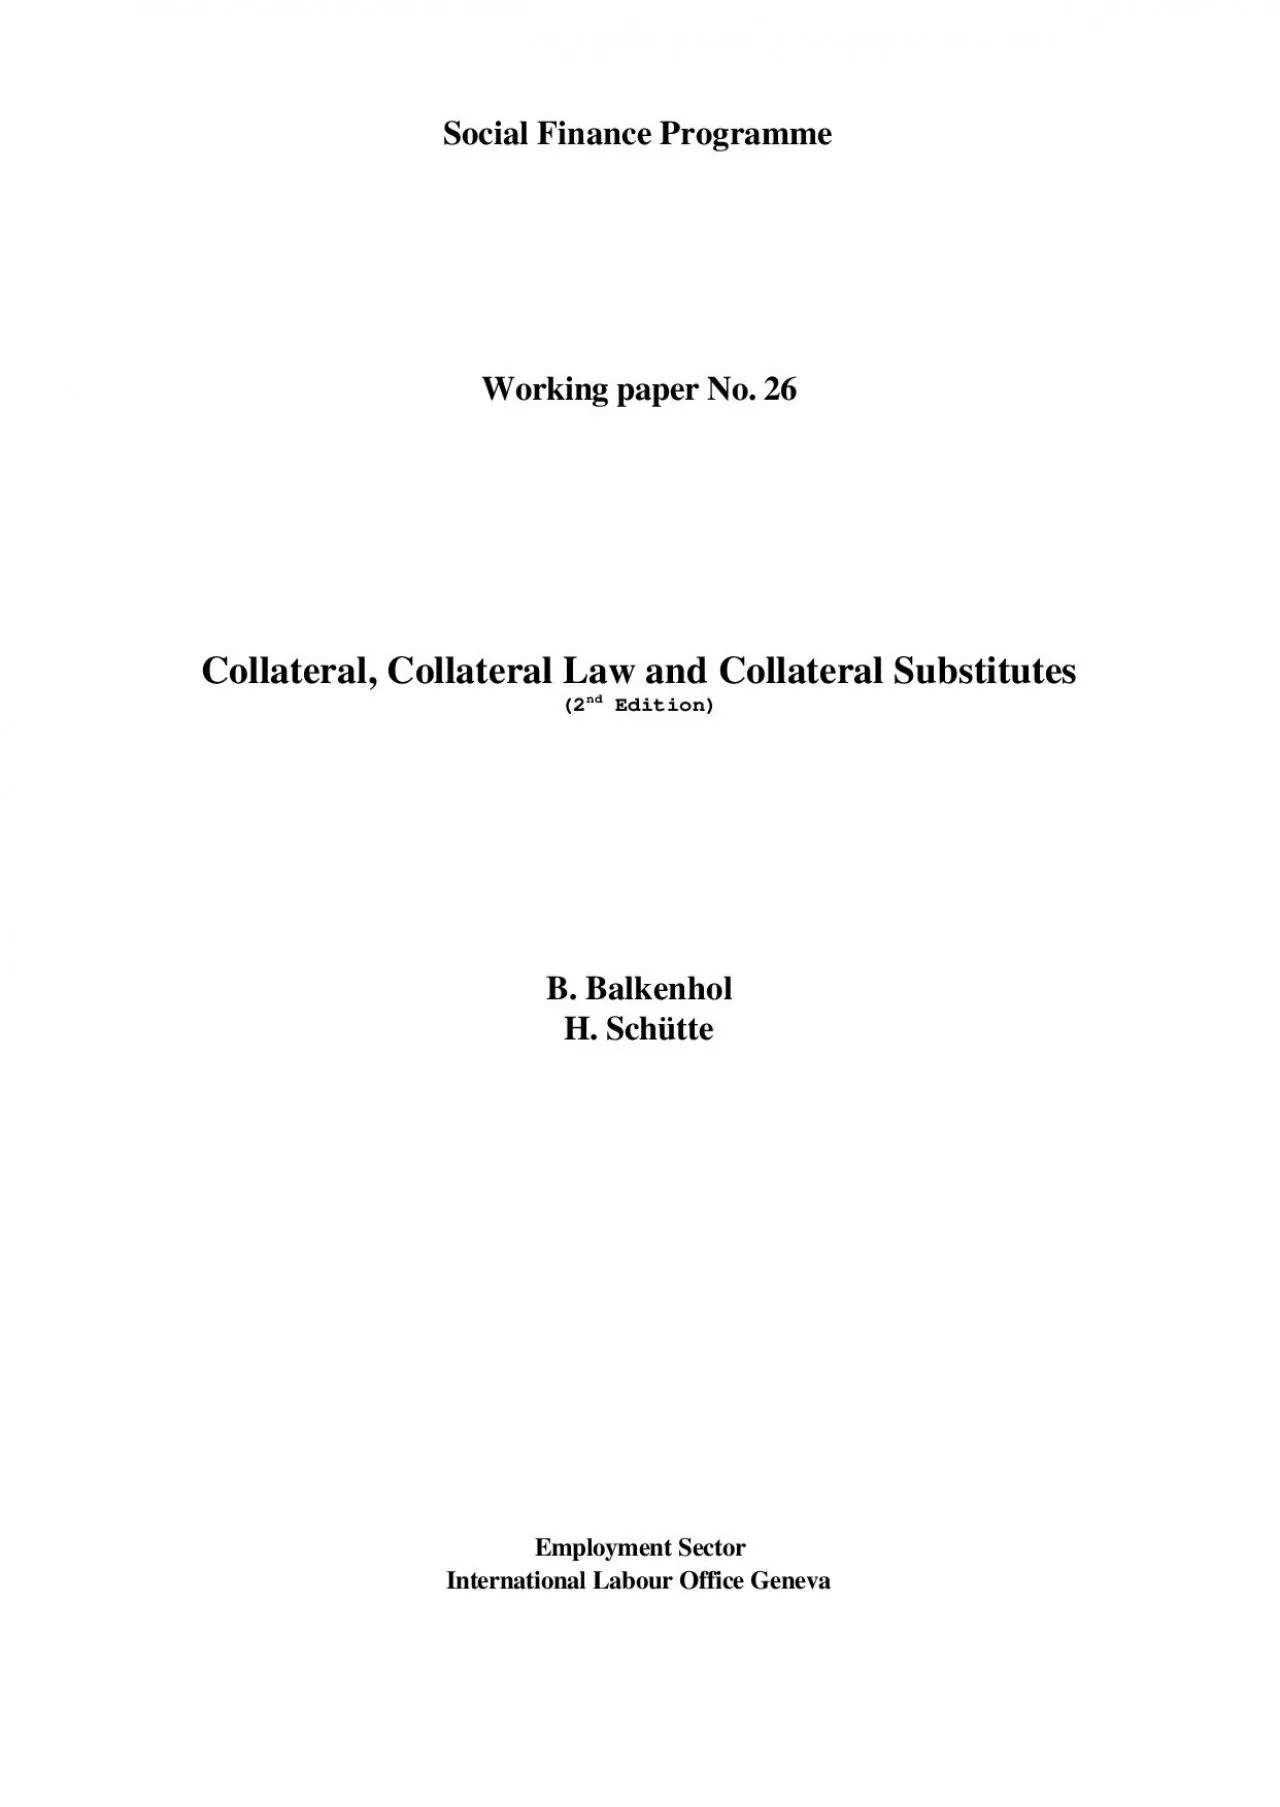 Social Finance Programme              Working paper No 26      Collat